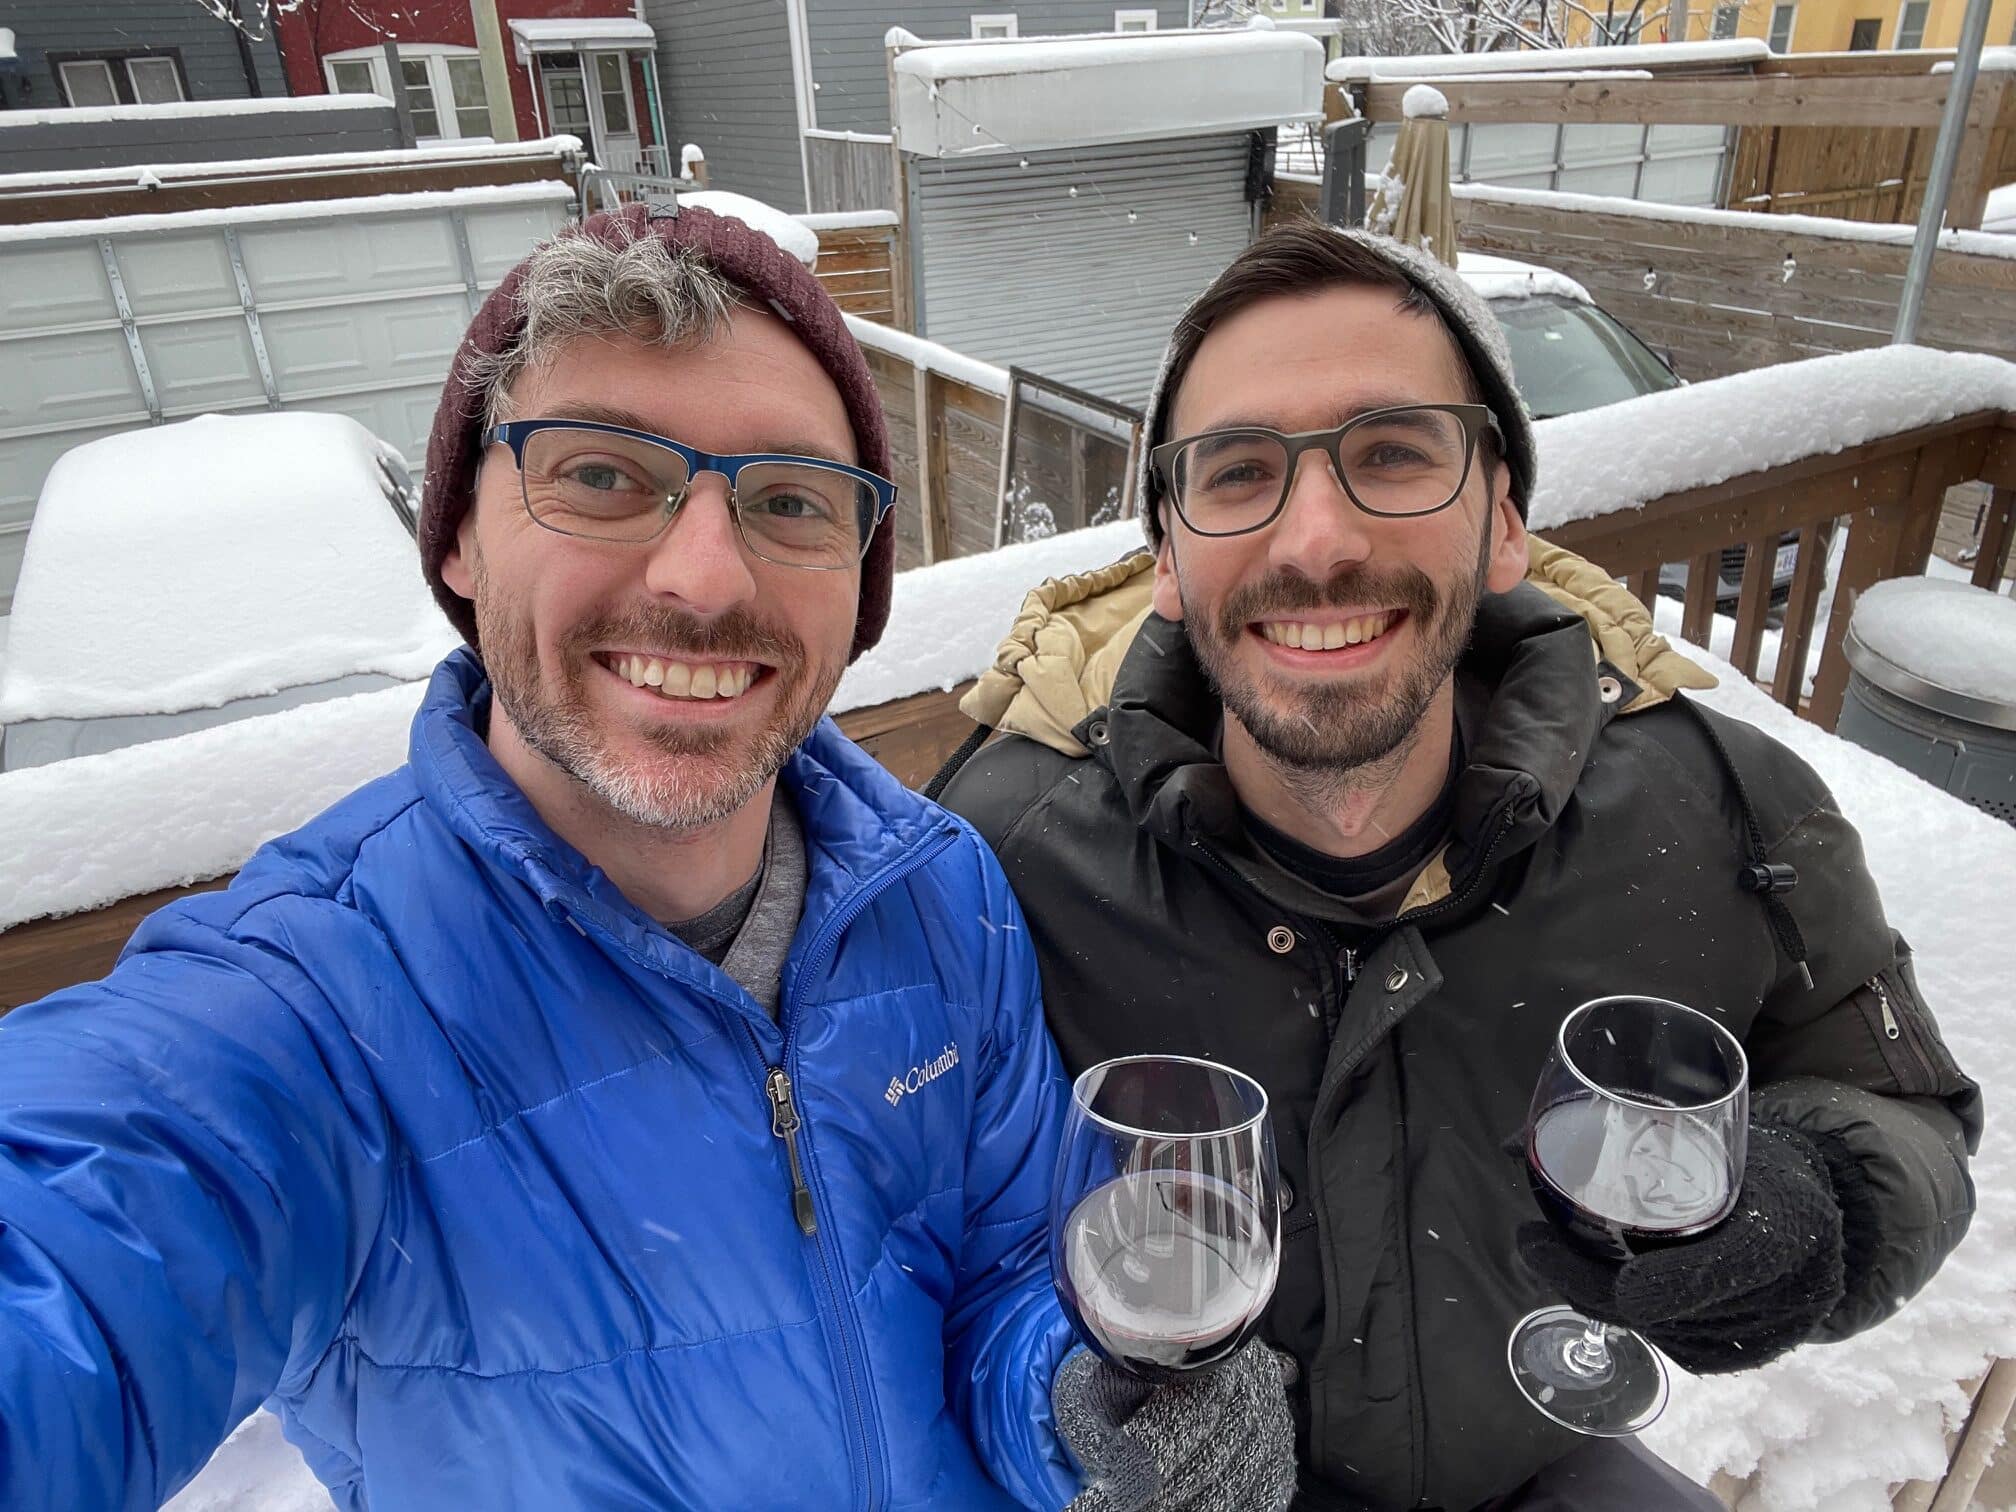 Nathan and his partner sip wine on a snowy deck.